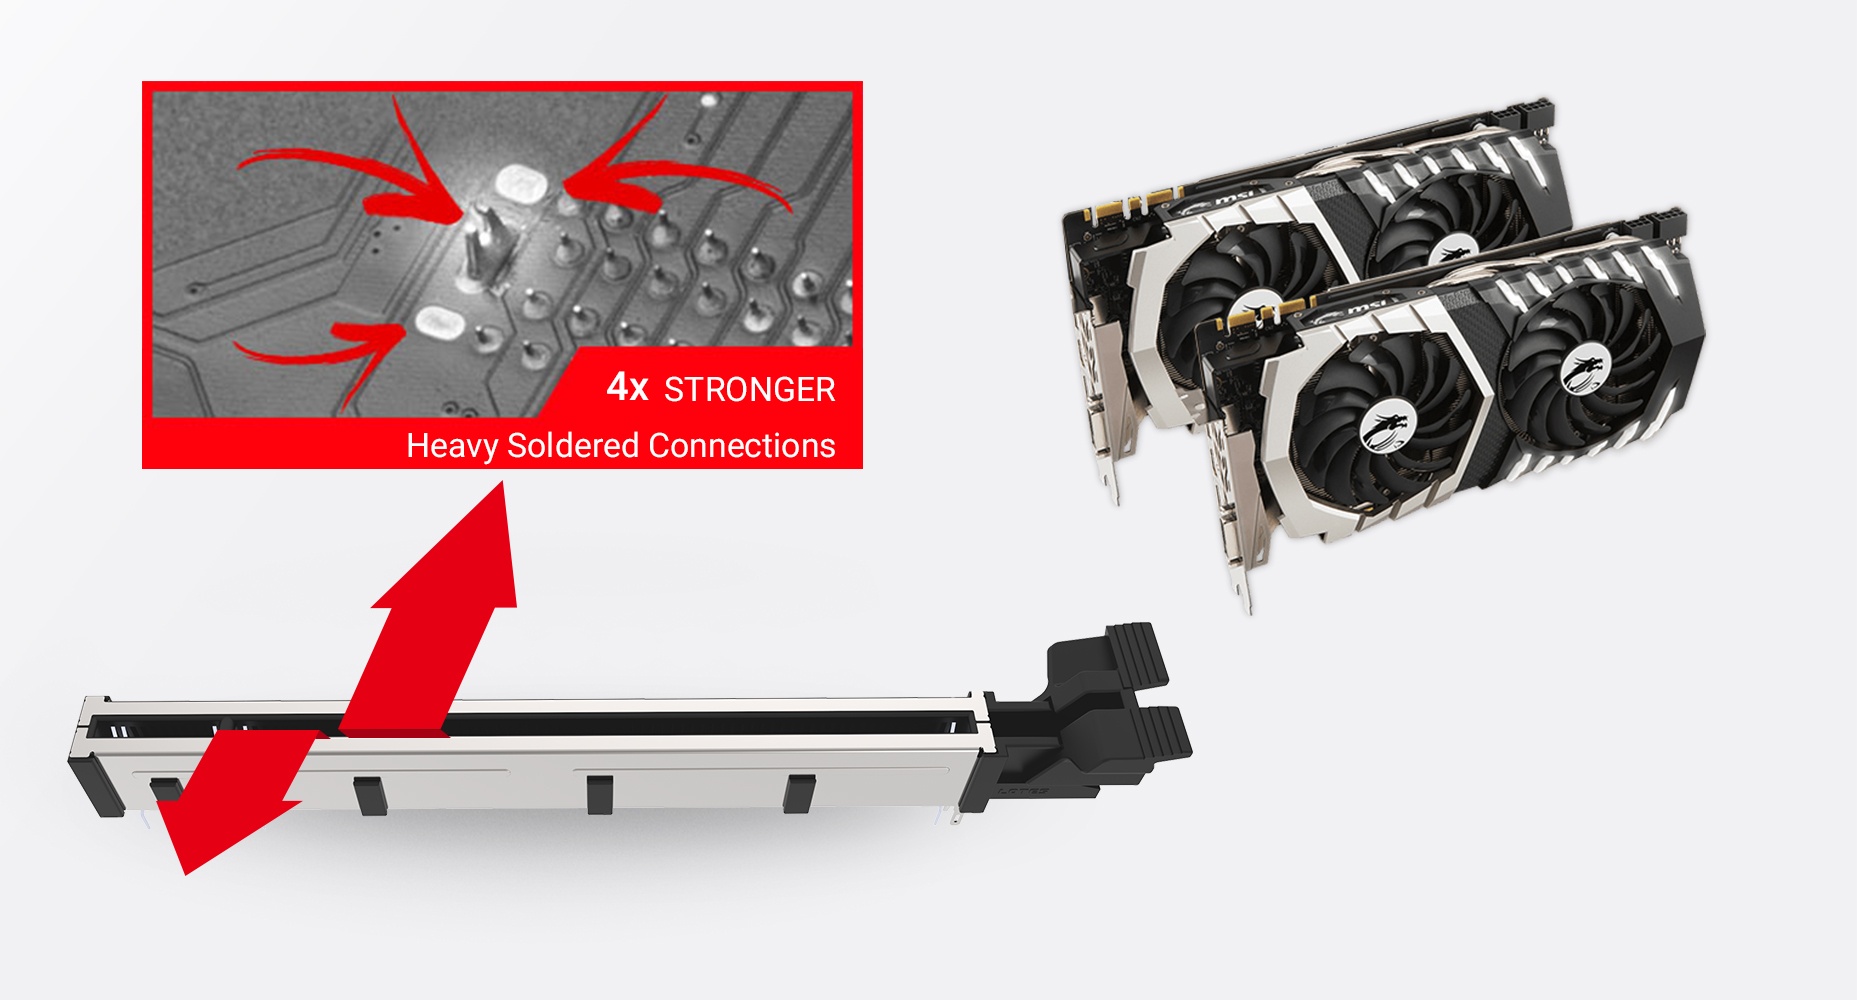 MSI MAG Z490 TOMAHAWK MULTIPLE GPU SUPPORTS AND STEEL ARMOR